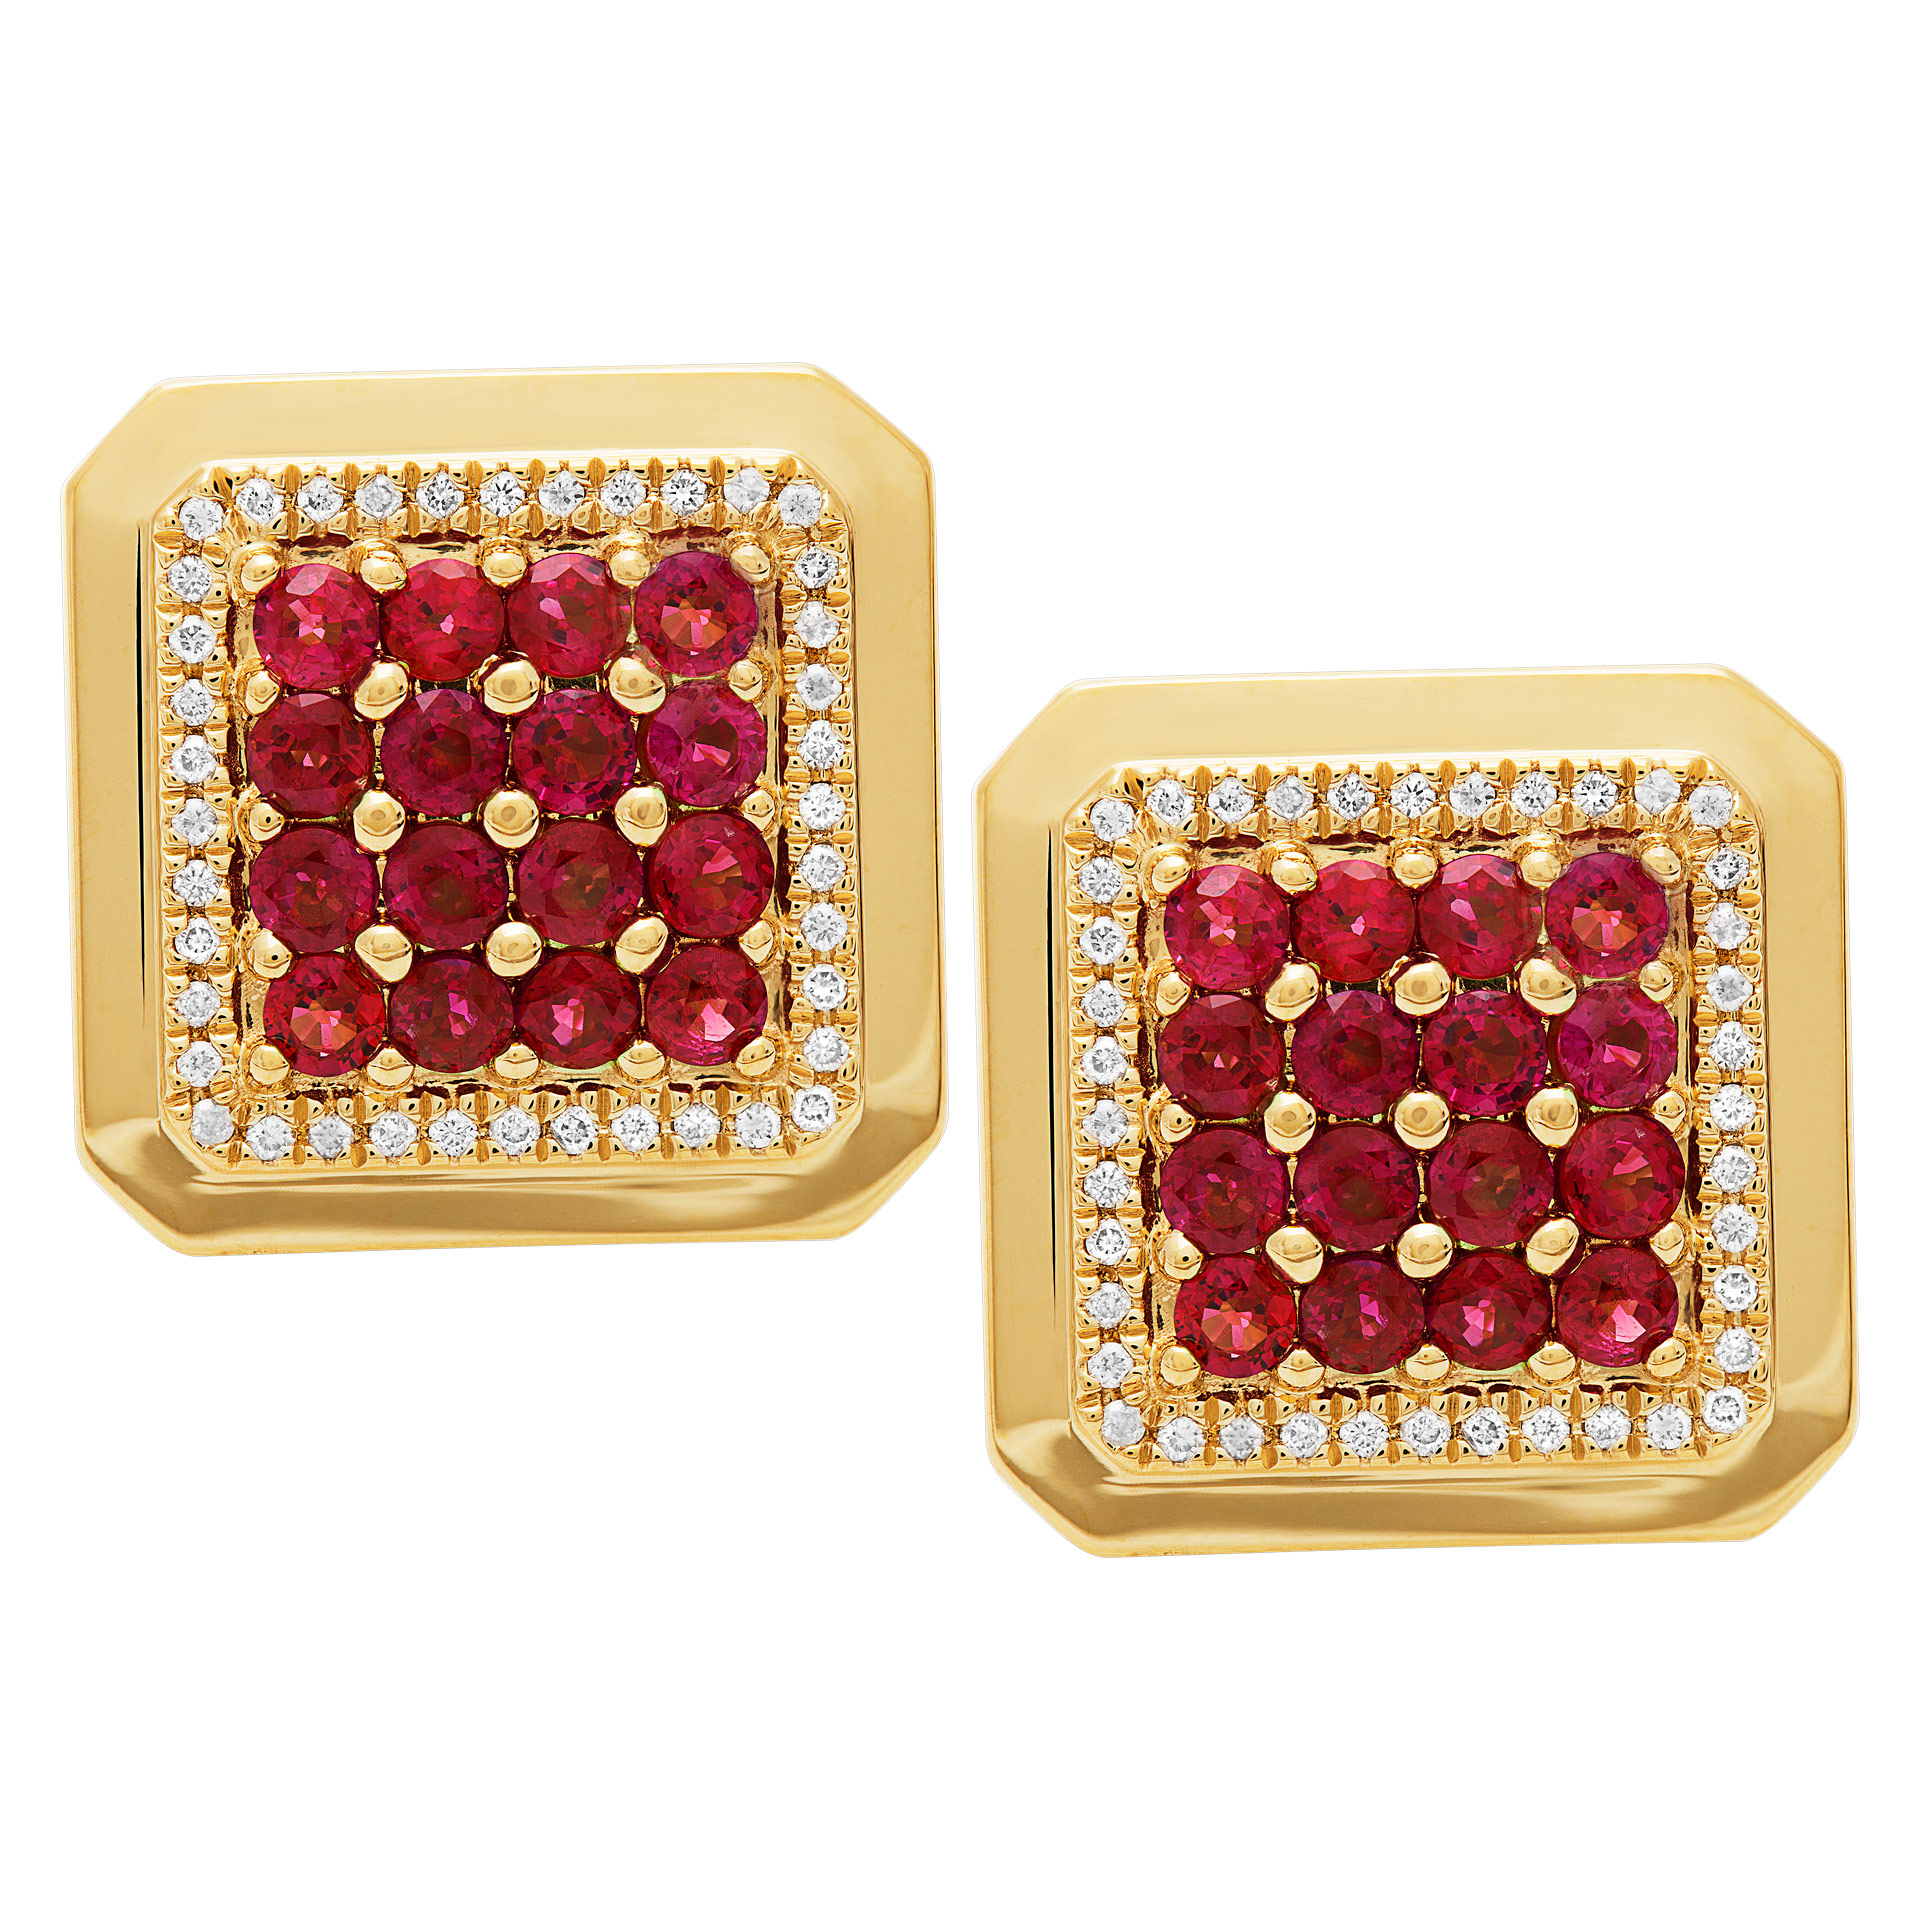 Ruby & diamond cufflinks in 18k yellow gold. 3.20 carats in rubies image 1